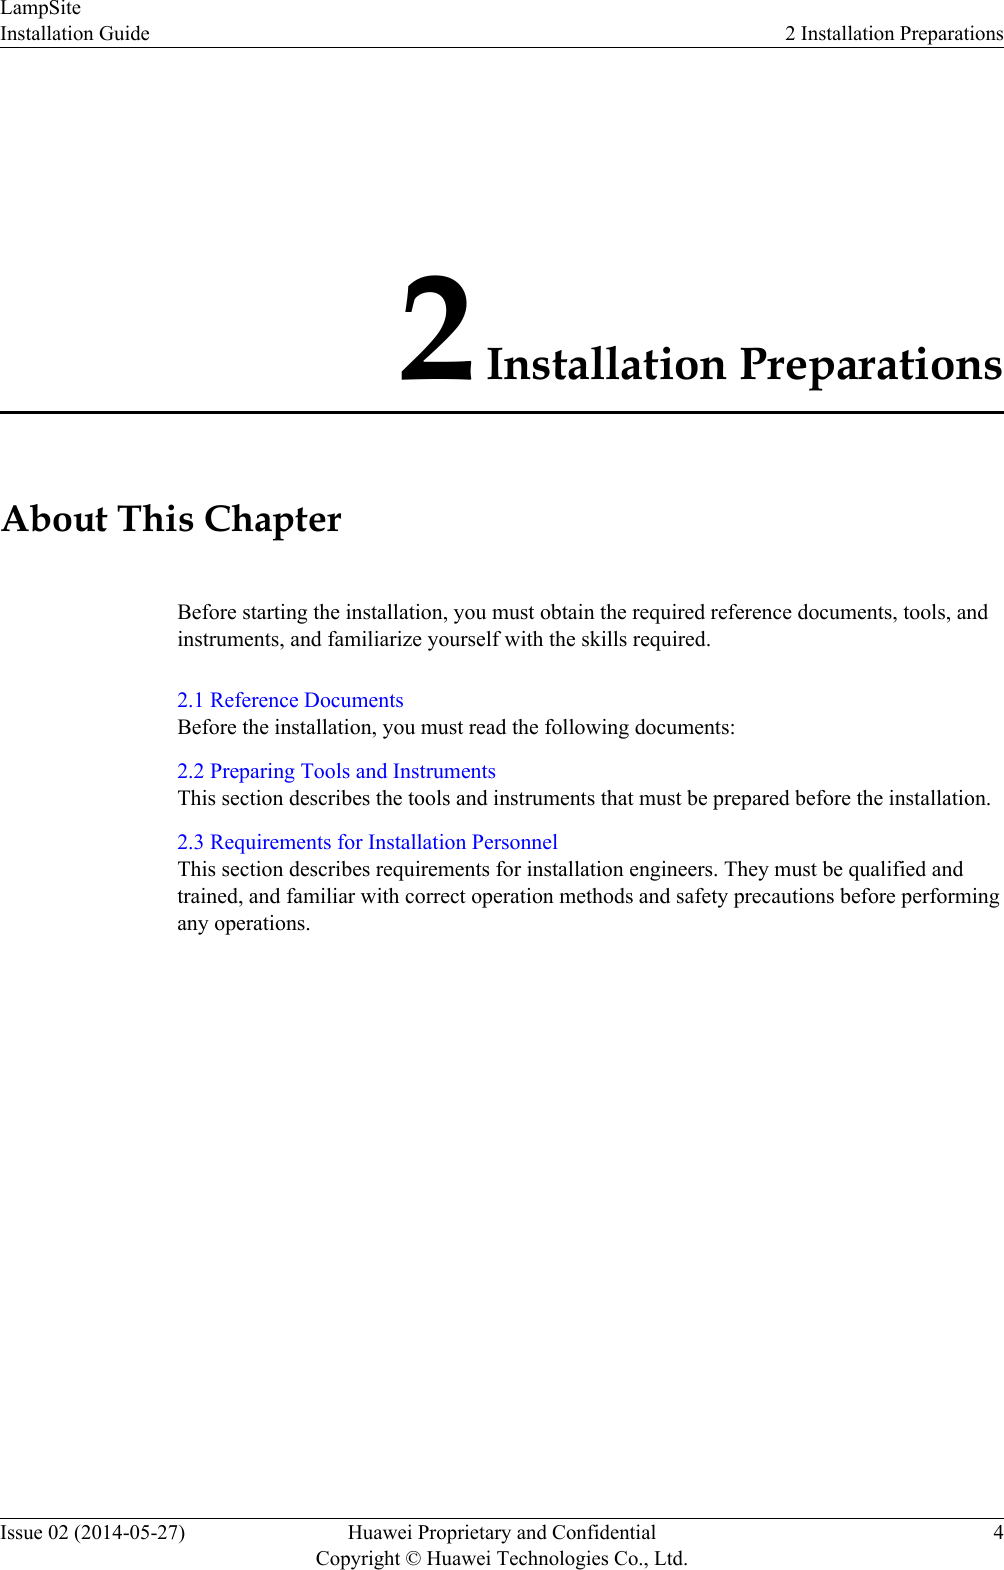 2 Installation PreparationsAbout This ChapterBefore starting the installation, you must obtain the required reference documents, tools, andinstruments, and familiarize yourself with the skills required.2.1 Reference DocumentsBefore the installation, you must read the following documents:2.2 Preparing Tools and InstrumentsThis section describes the tools and instruments that must be prepared before the installation.2.3 Requirements for Installation PersonnelThis section describes requirements for installation engineers. They must be qualified andtrained, and familiar with correct operation methods and safety precautions before performingany operations.LampSiteInstallation Guide 2 Installation PreparationsIssue 02 (2014-05-27) Huawei Proprietary and ConfidentialCopyright © Huawei Technologies Co., Ltd.4